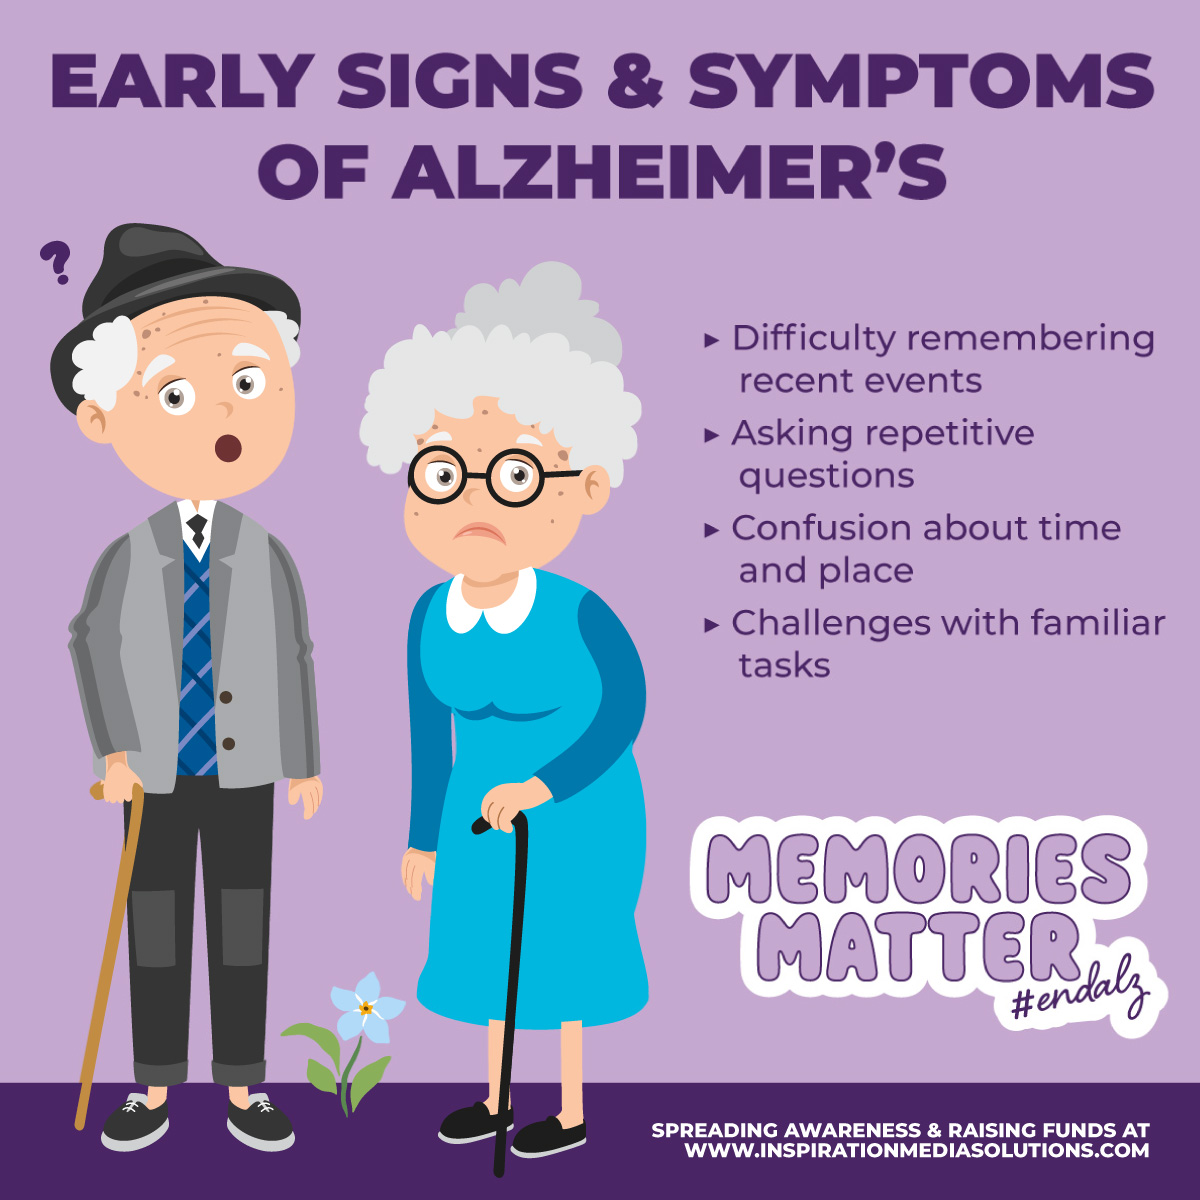 Early signs of Alzheimer's